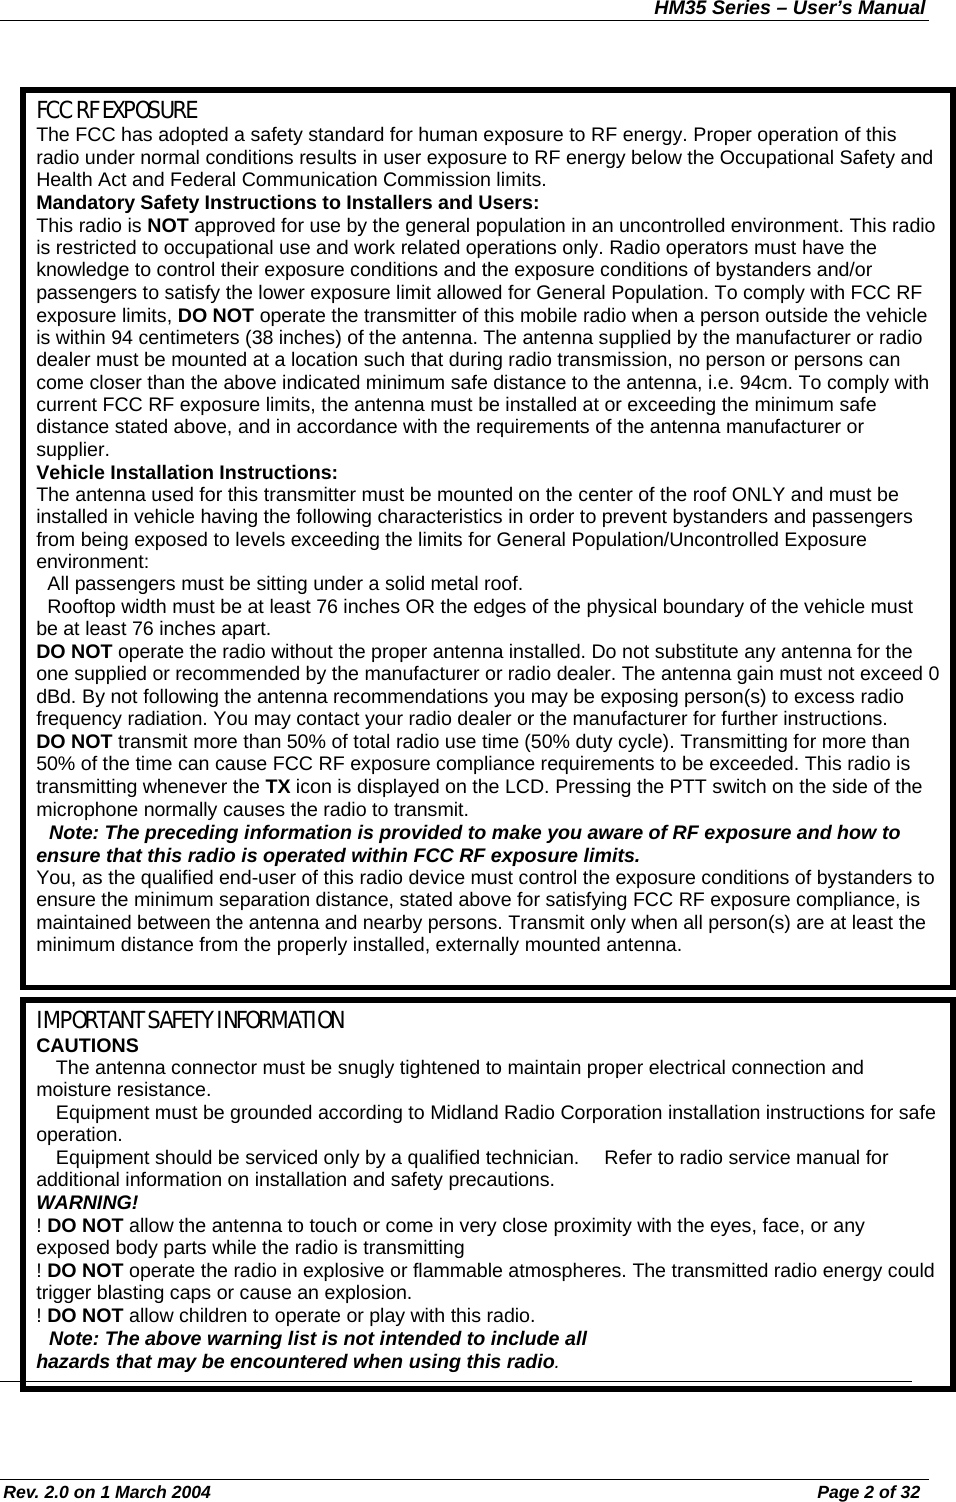 HM35 Series – User’s Manual Rev. 2.0 on 1 March 2004  Page 2 of 32                                                FCC RF EXPOSURE The FCC has adopted a safety standard for human exposure to RF energy. Proper operation of this radio under normal conditions results in user exposure to RF energy below the Occupational Safety and Health Act and Federal Communication Commission limits. Mandatory Safety Instructions to Installers and Users: This radio is NOT approved for use by the general population in an uncontrolled environment. This radio is restricted to occupational use and work related operations only. Radio operators must have the knowledge to control their exposure conditions and the exposure conditions of bystanders and/or passengers to satisfy the lower exposure limit allowed for General Population. To comply with FCC RF exposure limits, DO NOT operate the transmitter of this mobile radio when a person outside the vehicle is within 94 centimeters (38 inches) of the antenna. The antenna supplied by the manufacturer or radio dealer must be mounted at a location such that during radio transmission, no person or persons can come closer than the above indicated minimum safe distance to the antenna, i.e. 94cm. To comply with current FCC RF exposure limits, the antenna must be installed at or exceeding the minimum safe distance stated above, and in accordance with the requirements of the antenna manufacturer or supplier. Vehicle Installation Instructions: The antenna used for this transmitter must be mounted on the center of the roof ONLY and must be installed in vehicle having the following characteristics in order to prevent bystanders and passengers from being exposed to levels exceeding the limits for General Population/Uncontrolled Exposure environment:   All passengers must be sitting under a solid metal roof.   Rooftop width must be at least 76 inches OR the edges of the physical boundary of the vehicle must be at least 76 inches apart. DO NOT operate the radio without the proper antenna installed. Do not substitute any antenna for the one supplied or recommended by the manufacturer or radio dealer. The antenna gain must not exceed 0 dBd. By not following the antenna recommendations you may be exposing person(s) to excess radio frequency radiation. You may contact your radio dealer or the manufacturer for further instructions. DO NOT transmit more than 50% of total radio use time (50% duty cycle). Transmitting for more than 50% of the time can cause FCC RF exposure compliance requirements to be exceeded. This radio is transmitting whenever the TX icon is displayed on the LCD. Pressing the PTT switch on the side of the microphone normally causes the radio to transmit.   Note: The preceding information is provided to make you aware of RF exposure and how to ensure that this radio is operated within FCC RF exposure limits. You, as the qualified end-user of this radio device must control the exposure conditions of bystanders to ensure the minimum separation distance, stated above for satisfying FCC RF exposure compliance, is maintained between the antenna and nearby persons. Transmit only when all person(s) are at least the minimum distance from the properly installed, externally mounted antenna.  IMPORTANT SAFETY INFORMATION CAUTIONS   The antenna connector must be snugly tightened to maintain proper electrical connection and moisture resistance.    Equipment must be grounded according to Midland Radio Corporation installation instructions for safe operation.   Equipment should be serviced only by a qualified technician.   Refer to radio service manual for additional information on installation and safety precautions. WARNING! ! DO NOT allow the antenna to touch or come in very close proximity with the eyes, face, or any exposed body parts while the radio is transmitting ! DO NOT operate the radio in explosive or flammable atmospheres. The transmitted radio energy could trigger blasting caps or cause an explosion. ! DO NOT allow children to operate or play with this radio.   Note: The above warning list is not intended to include all hazards that may be encountered when using this radio. 